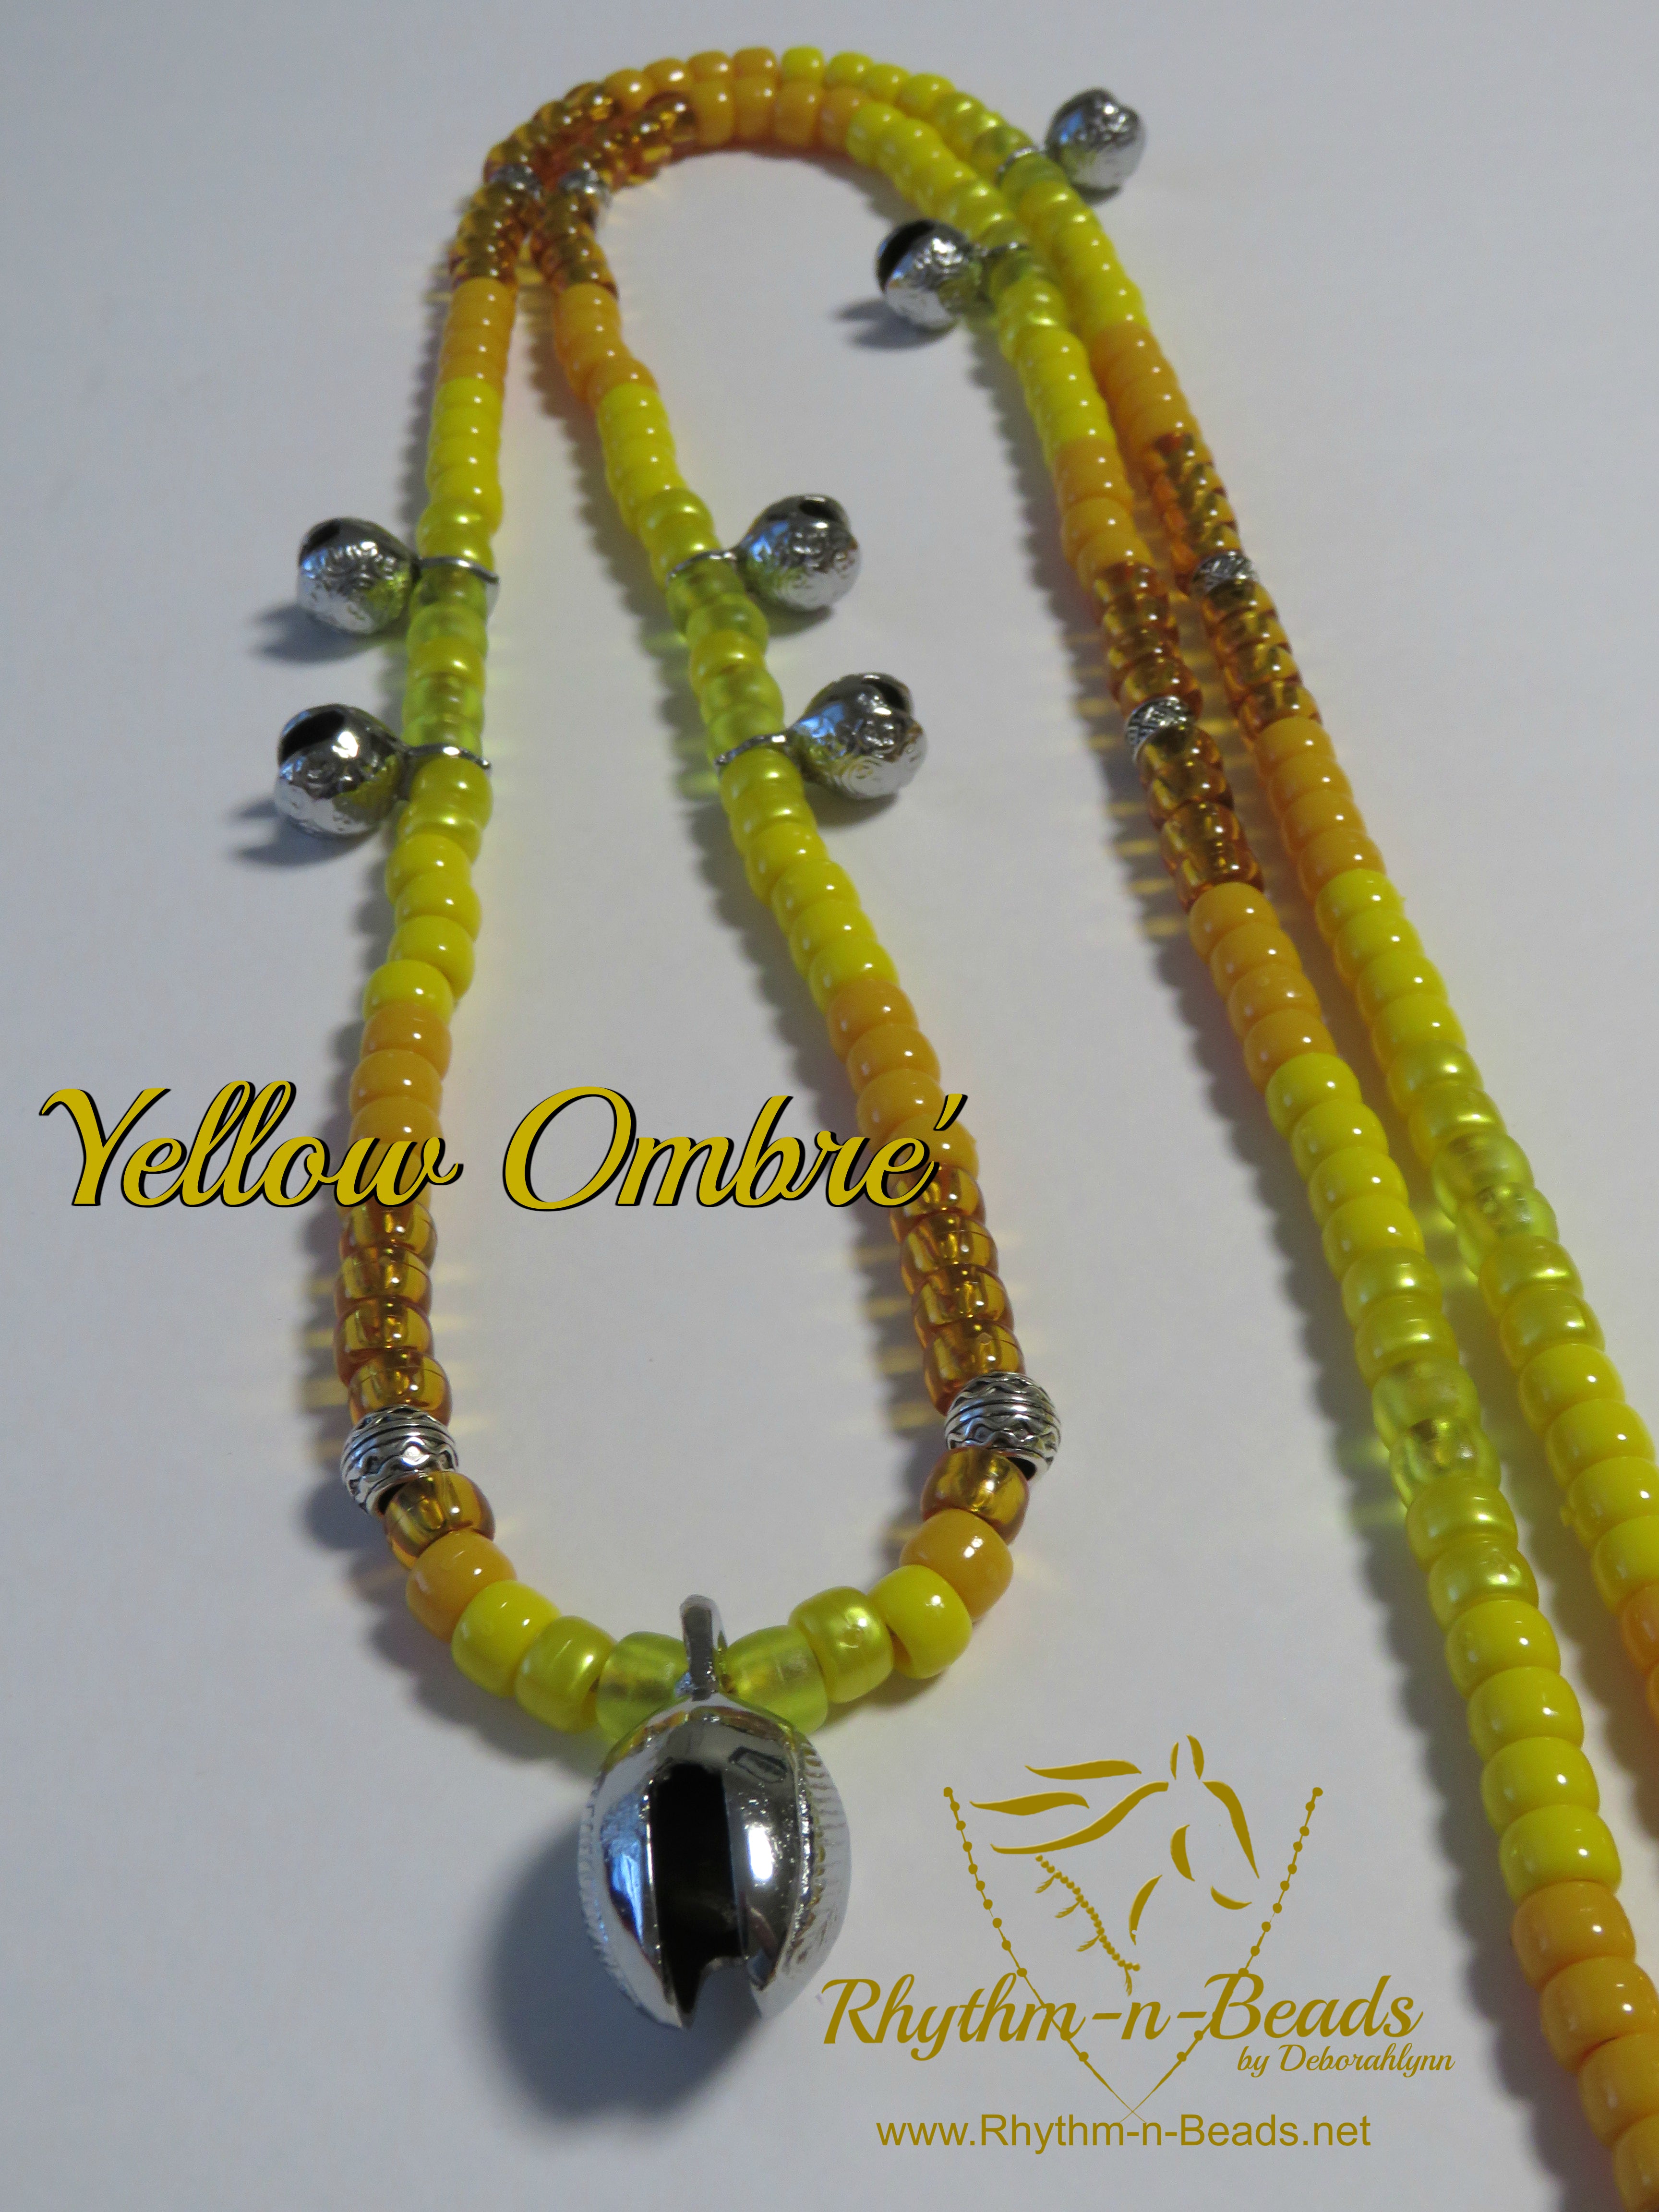 OMBRE' OBSESSION Rhythm Bead Necklace